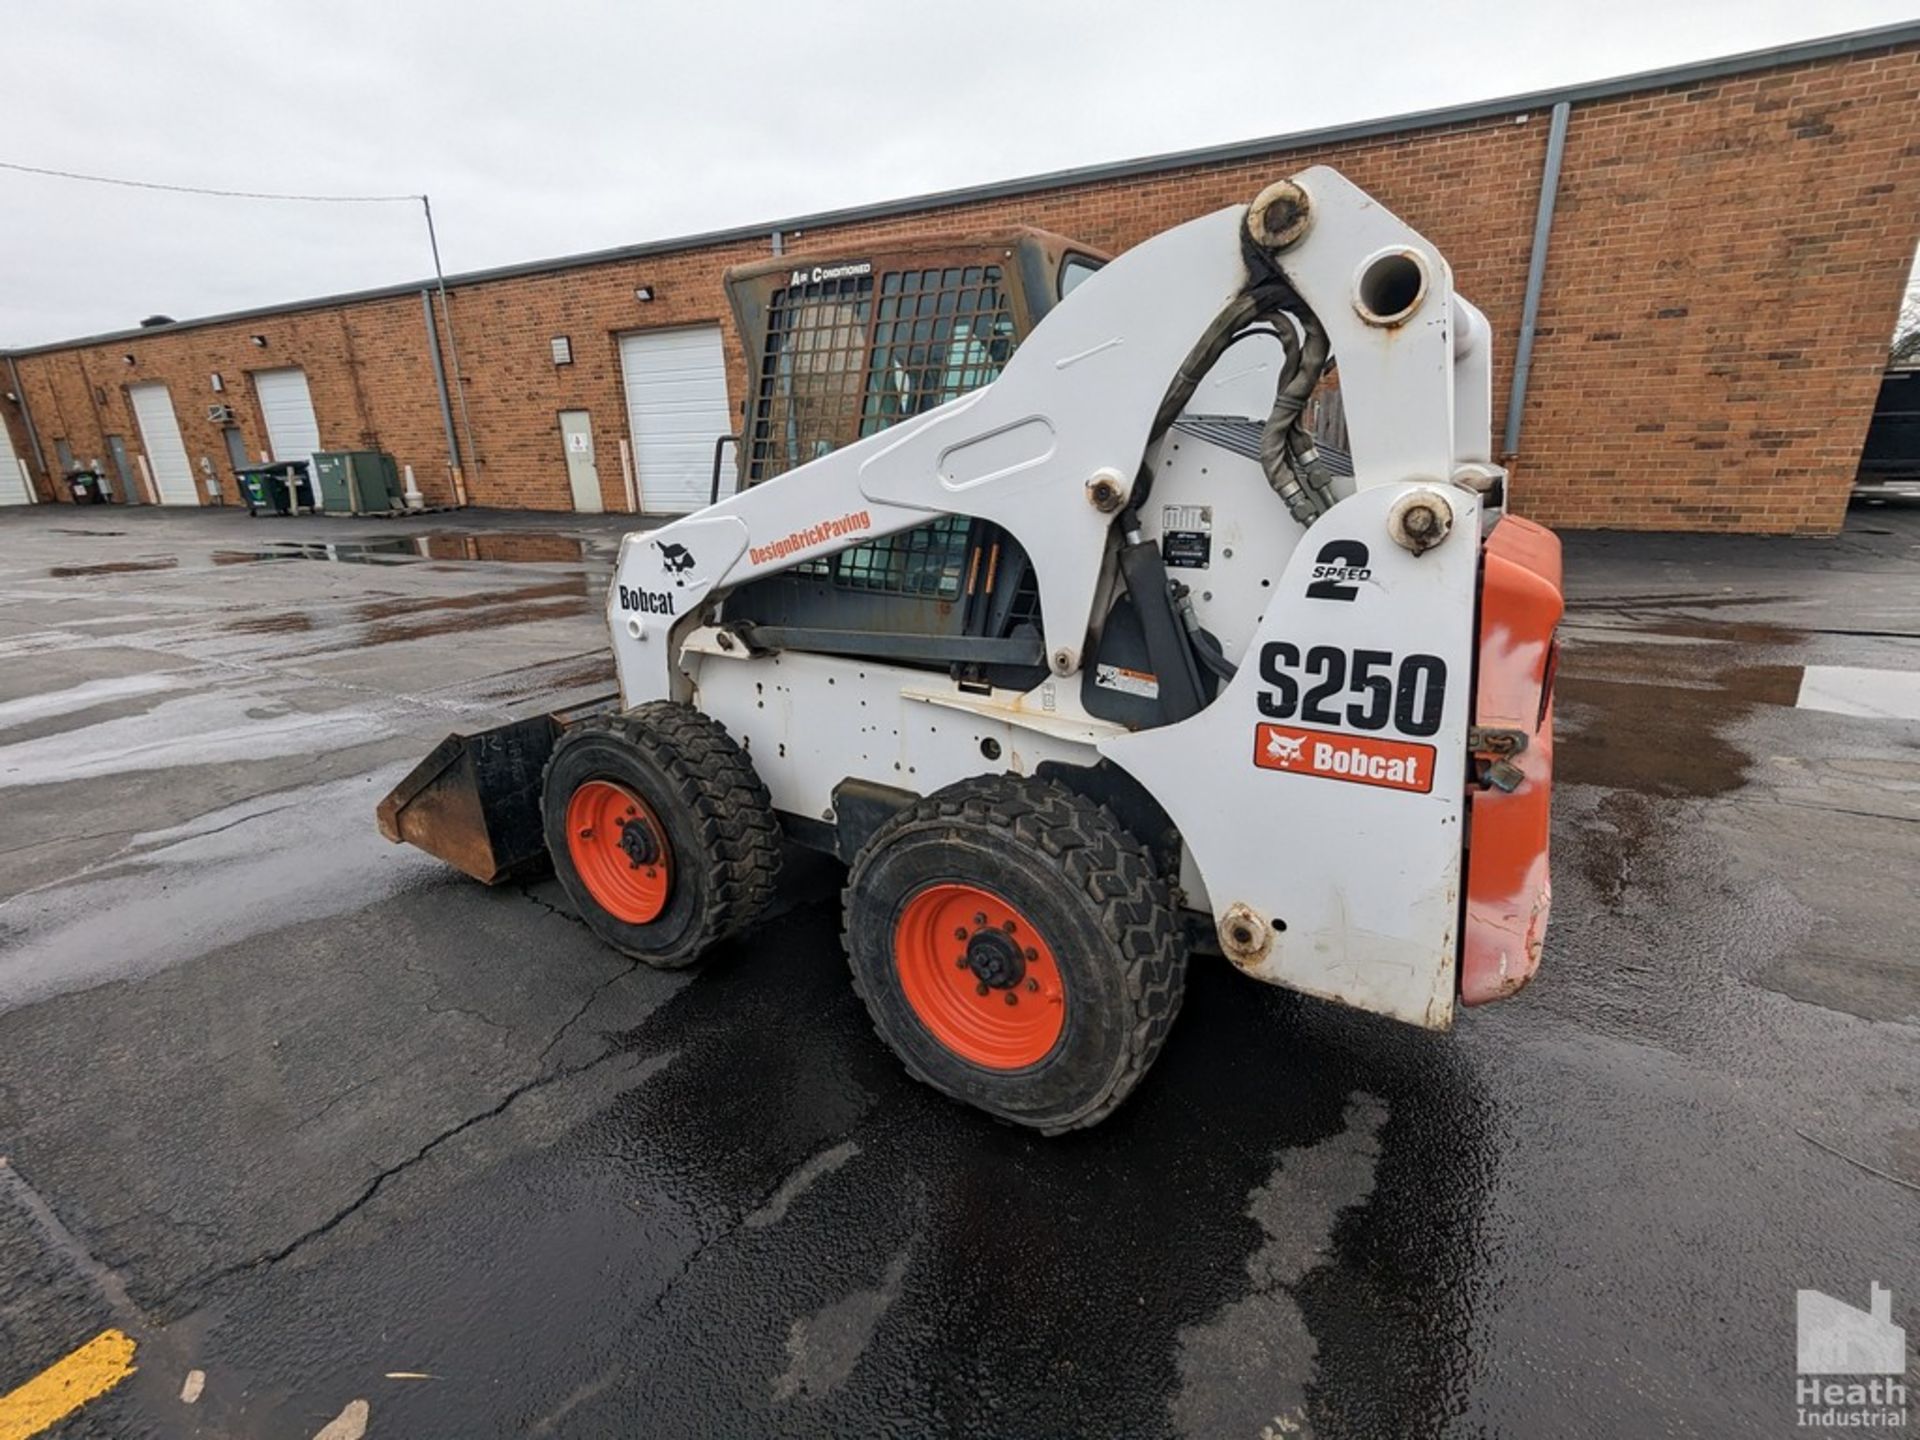 BOBCAT MODEL S250 SKID STEER LOADER, PIN 521316469, AUX HYDRAULICS, 2353 HOURS SHOWN ON METER - Image 4 of 10